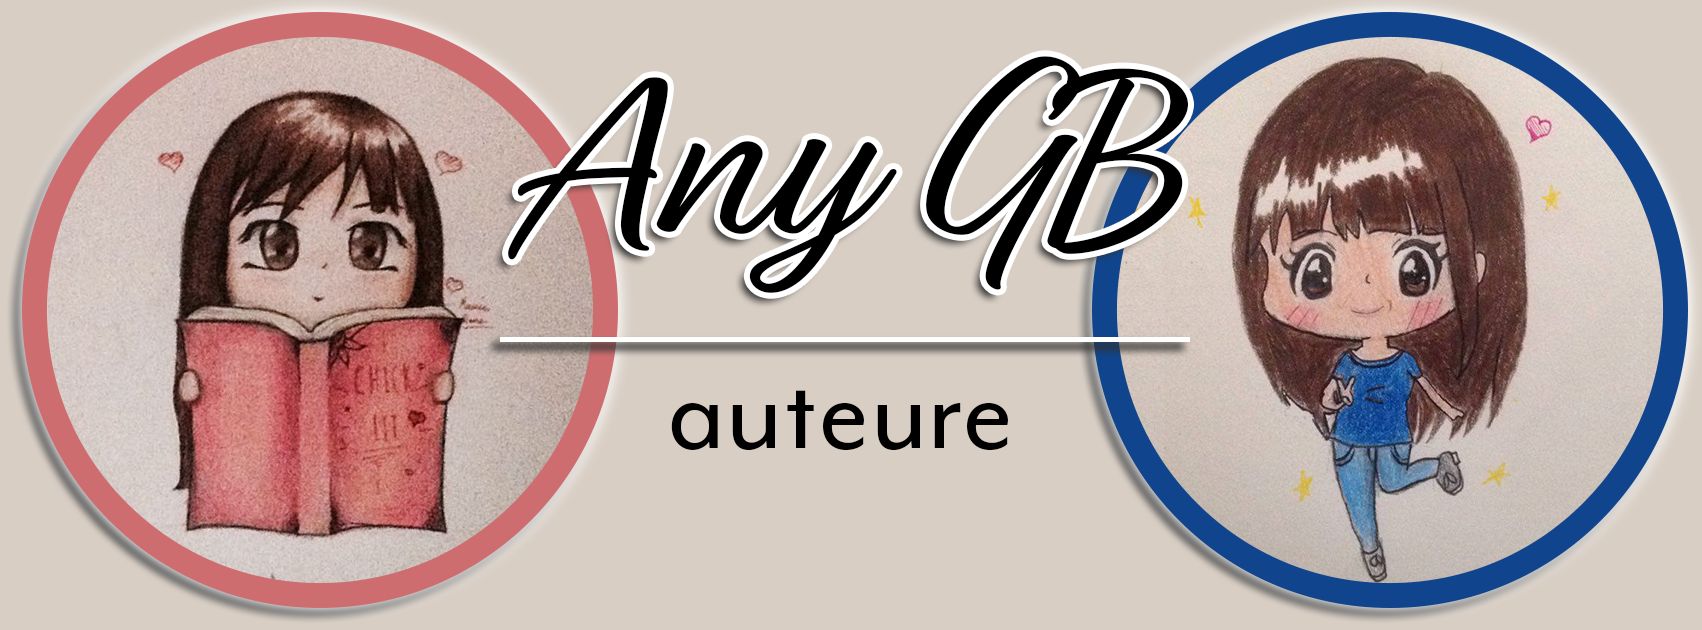 Any GB, Auteure